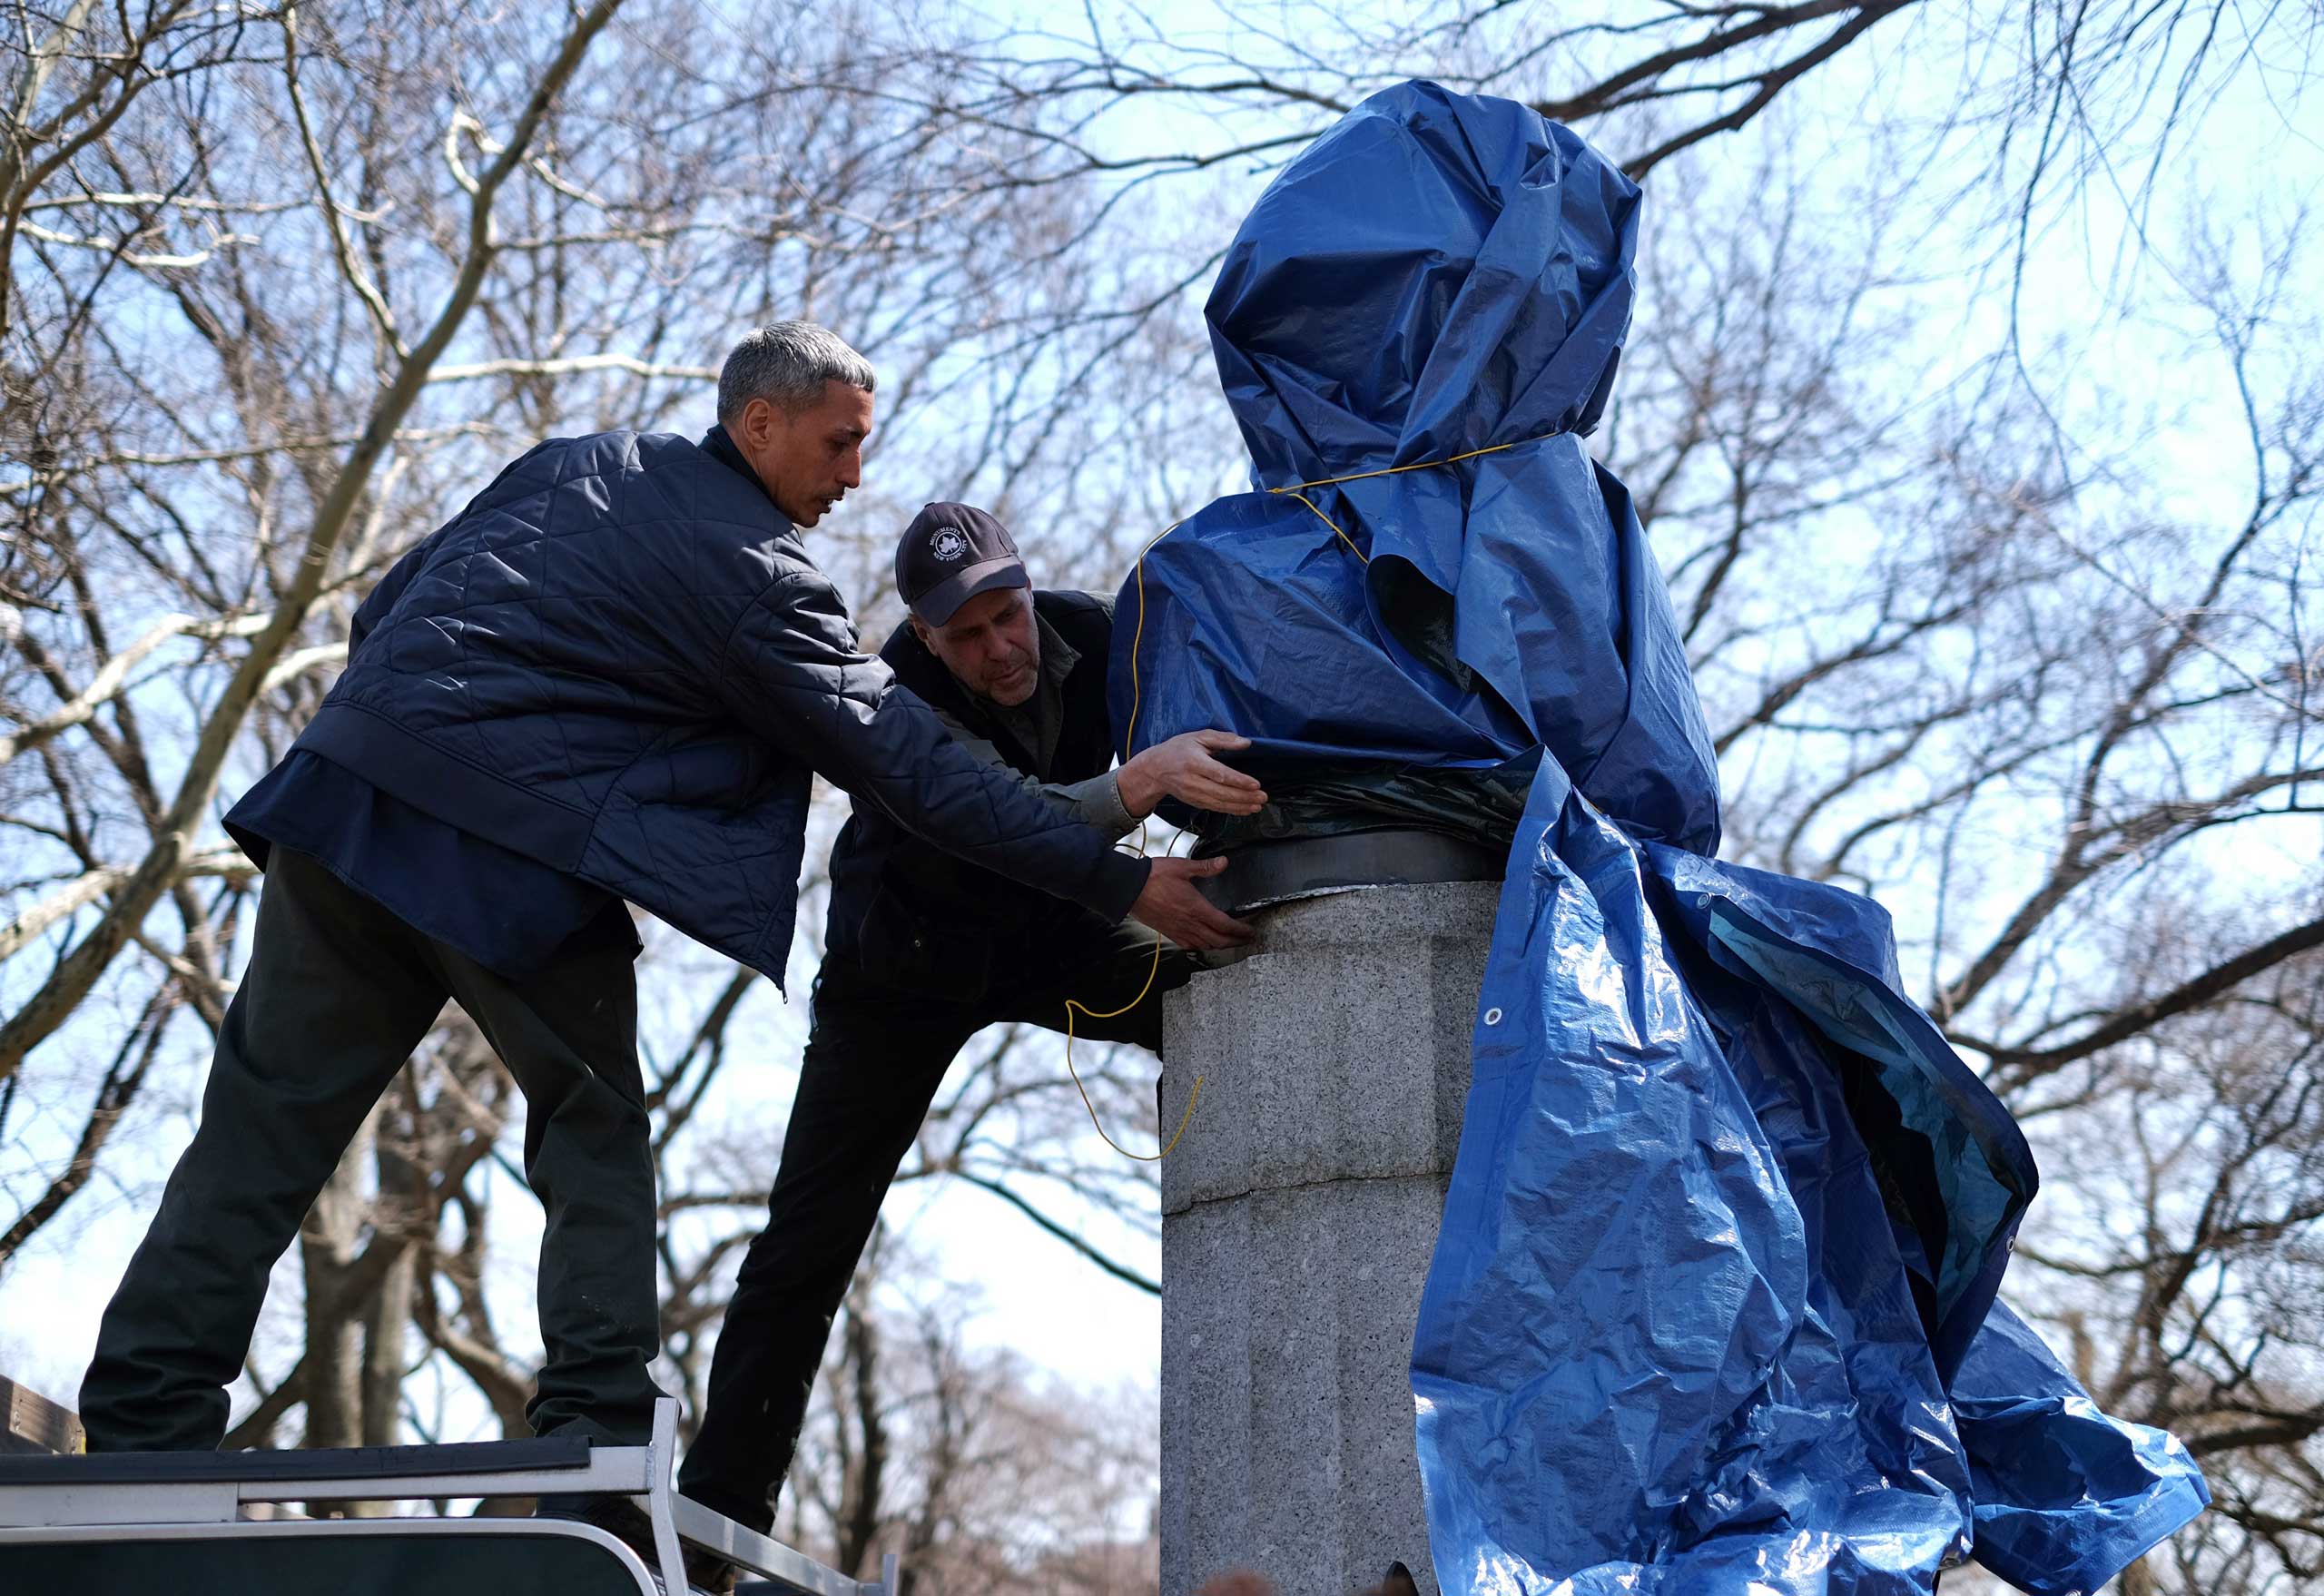 New York City Department of Parks and Recreation employees take down a statue of former National Security Agency (NSA) contractor Edward Snowden at the Fort Greene Park in Brooklyn, N.Y., on Apr. 6, 2015.